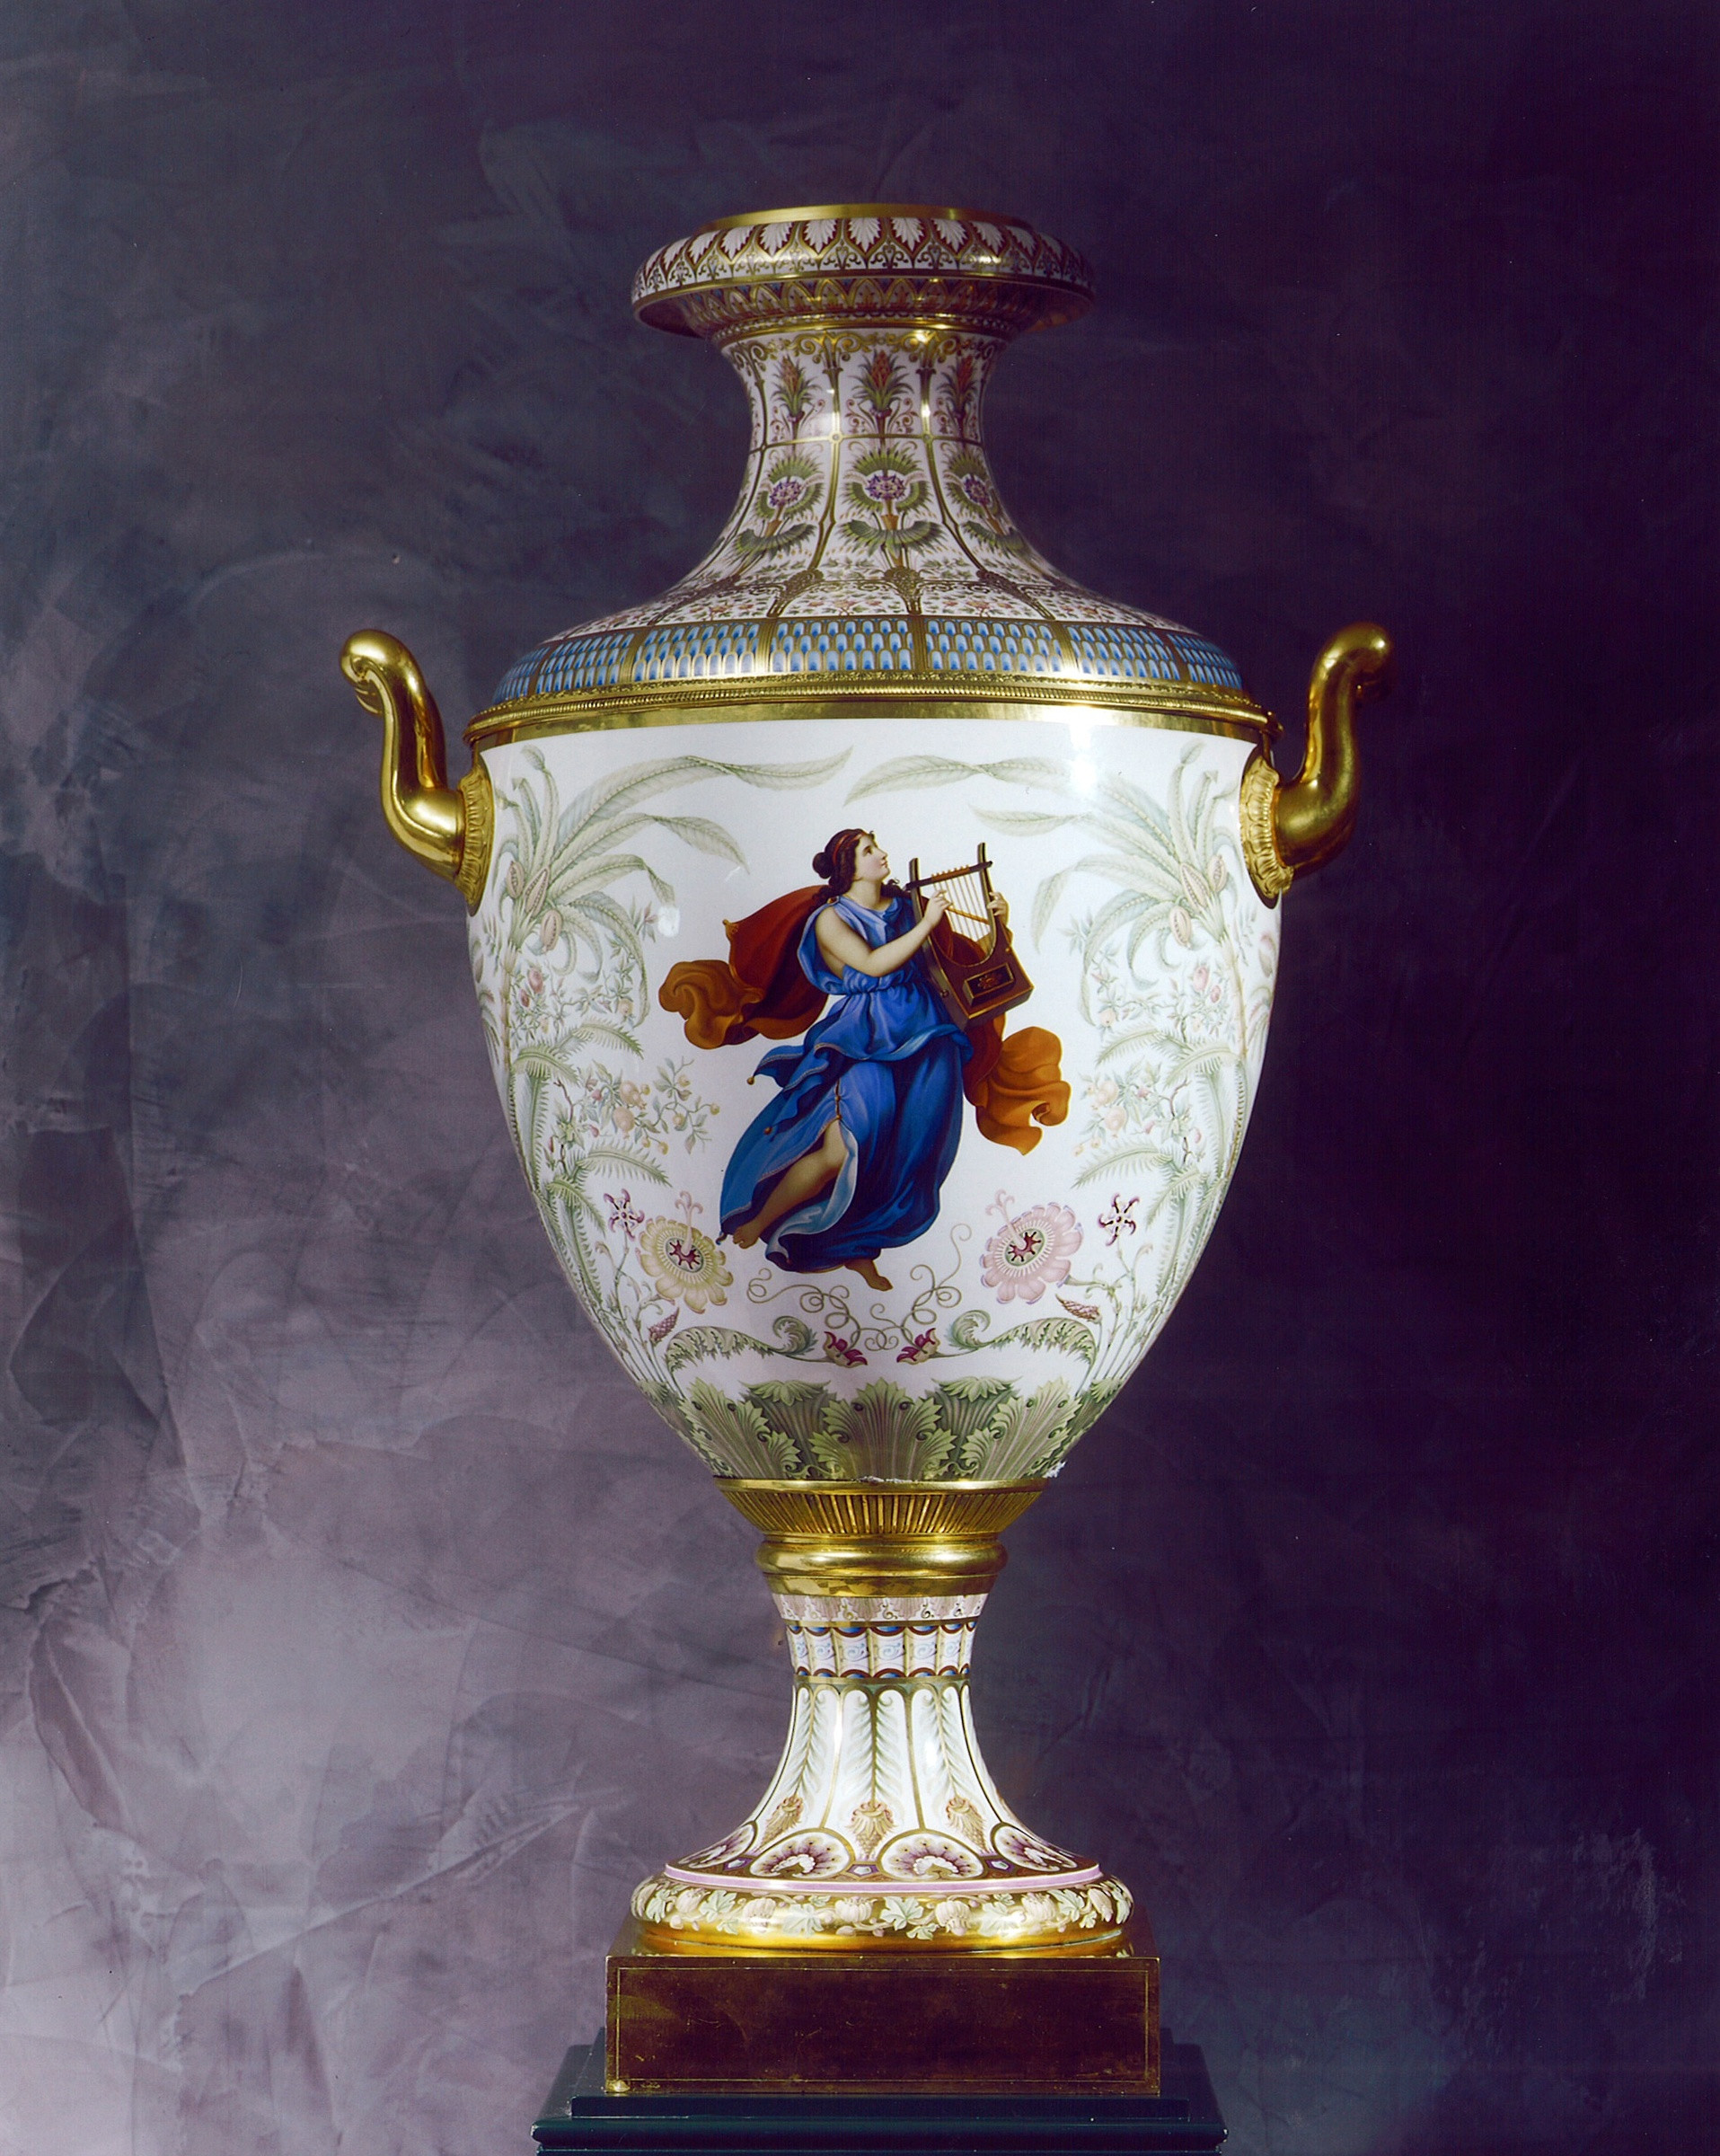 11 Stunning Most Expensive Vase In the World 2024 free download most expensive vase in the world of k p m kac2b6nigliche porzellan manufaktur berlin a classical munich inside a classical munich vase sorte no 4 made by the royal berlin porcelain manufacto